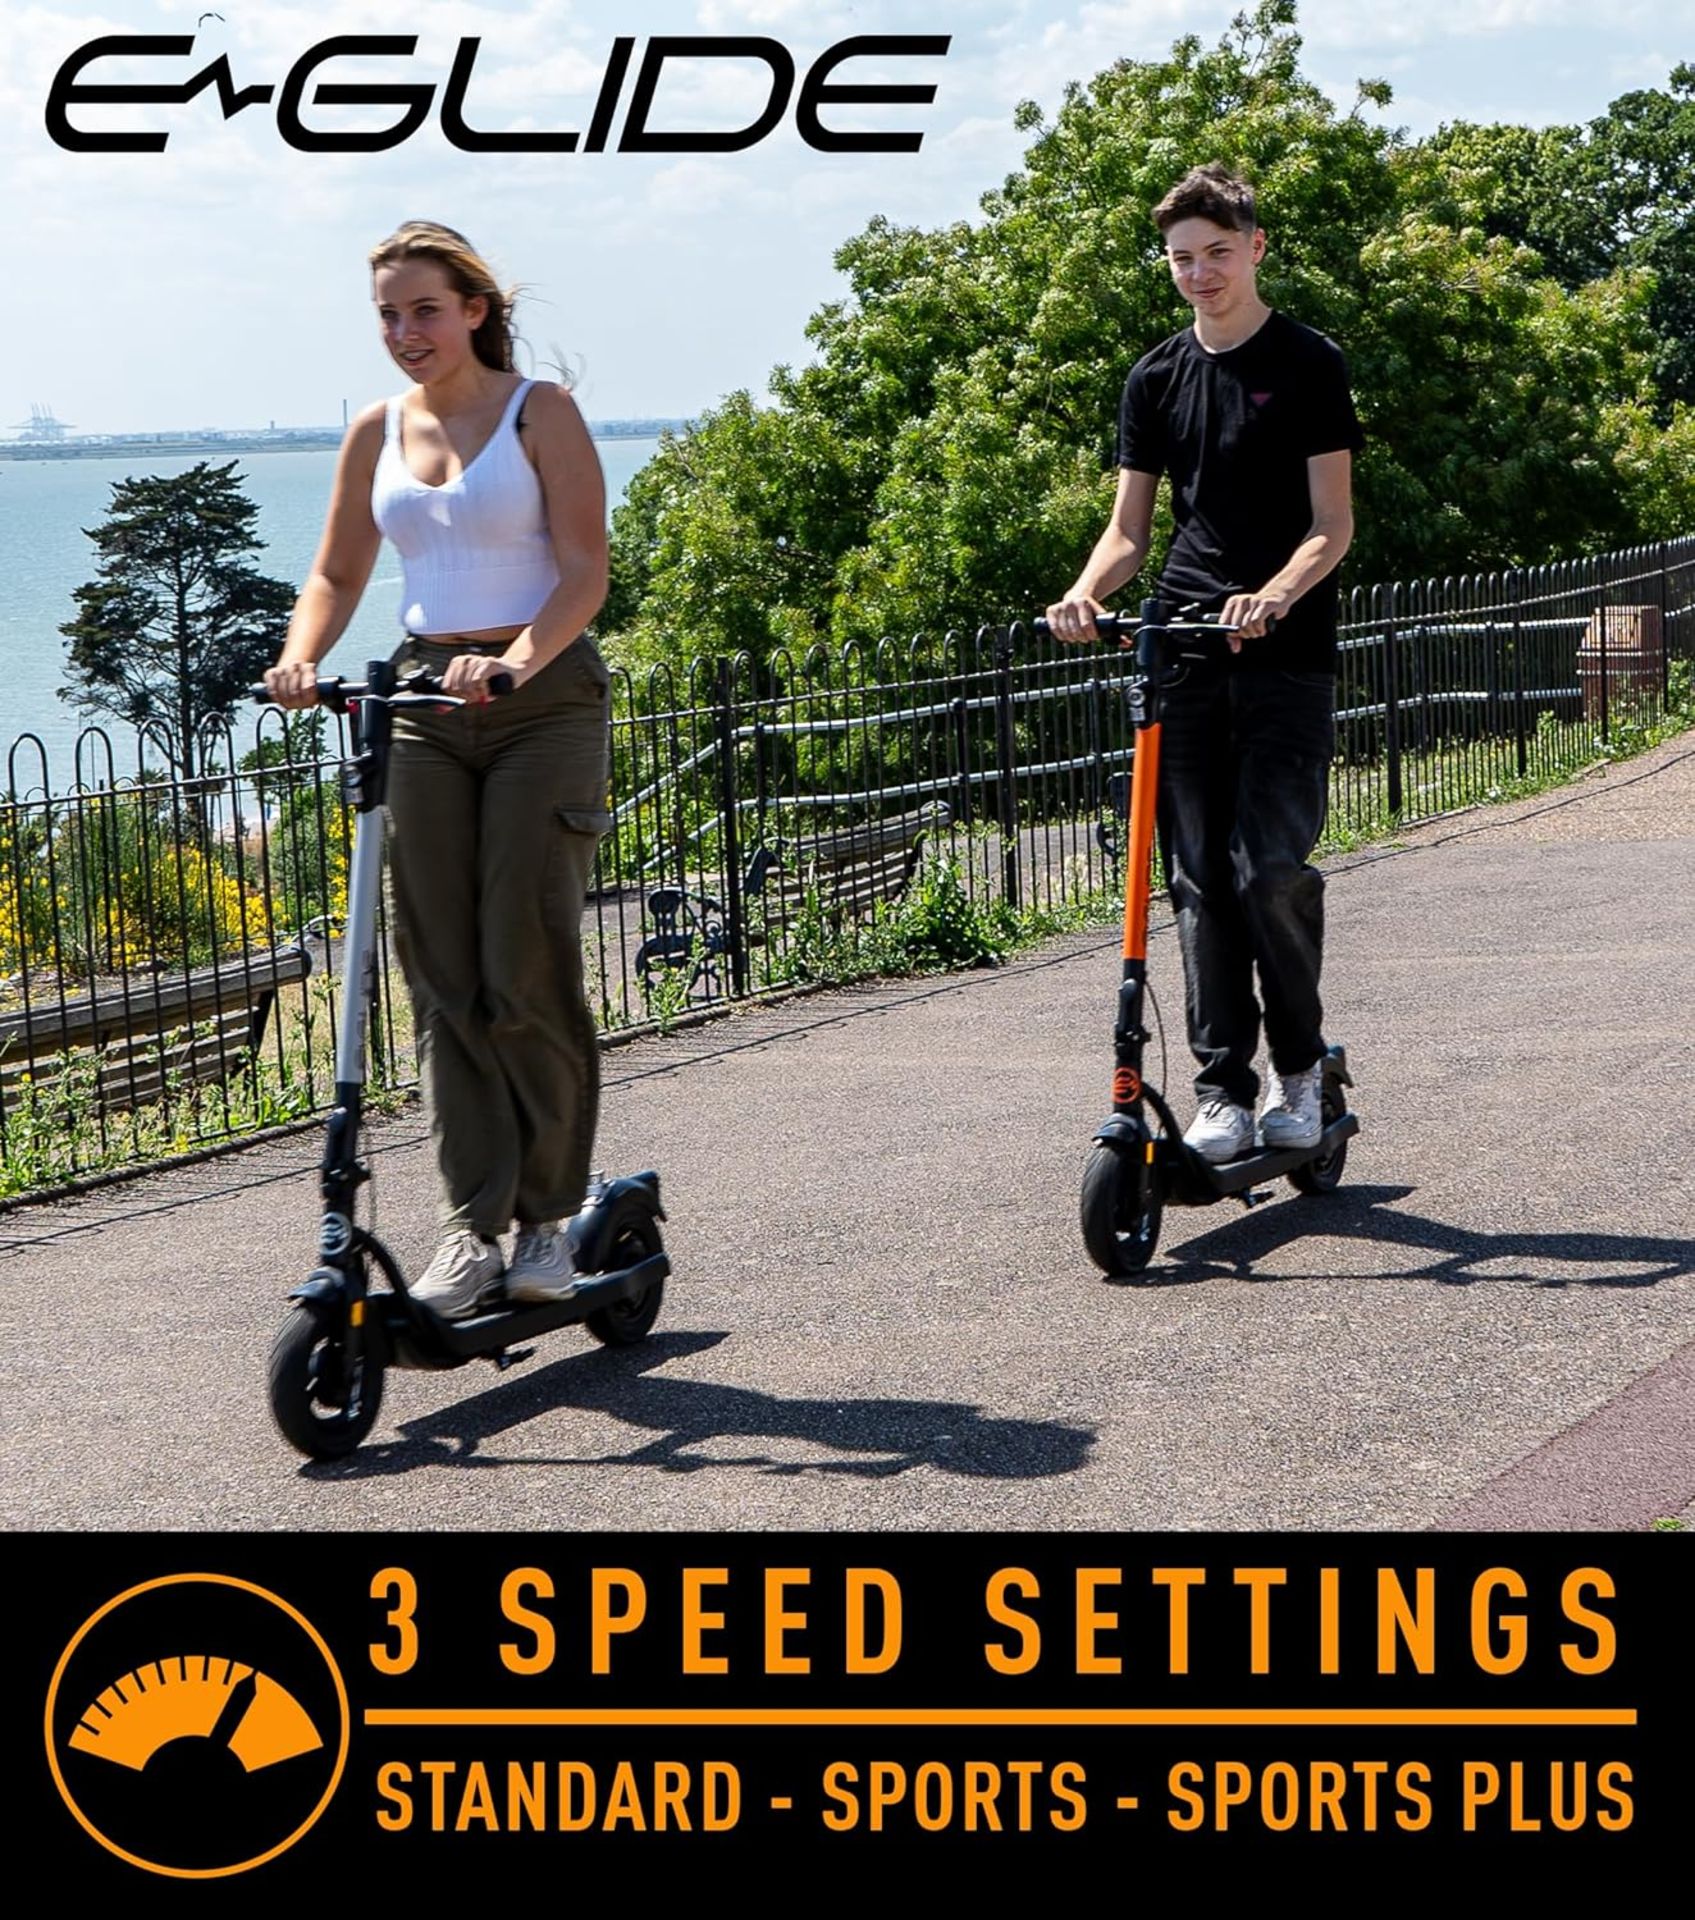 Brand New E-Glide V2 Electric Scooter Orange and Black RRP £599, Introducing a sleek and efficient - Image 5 of 6